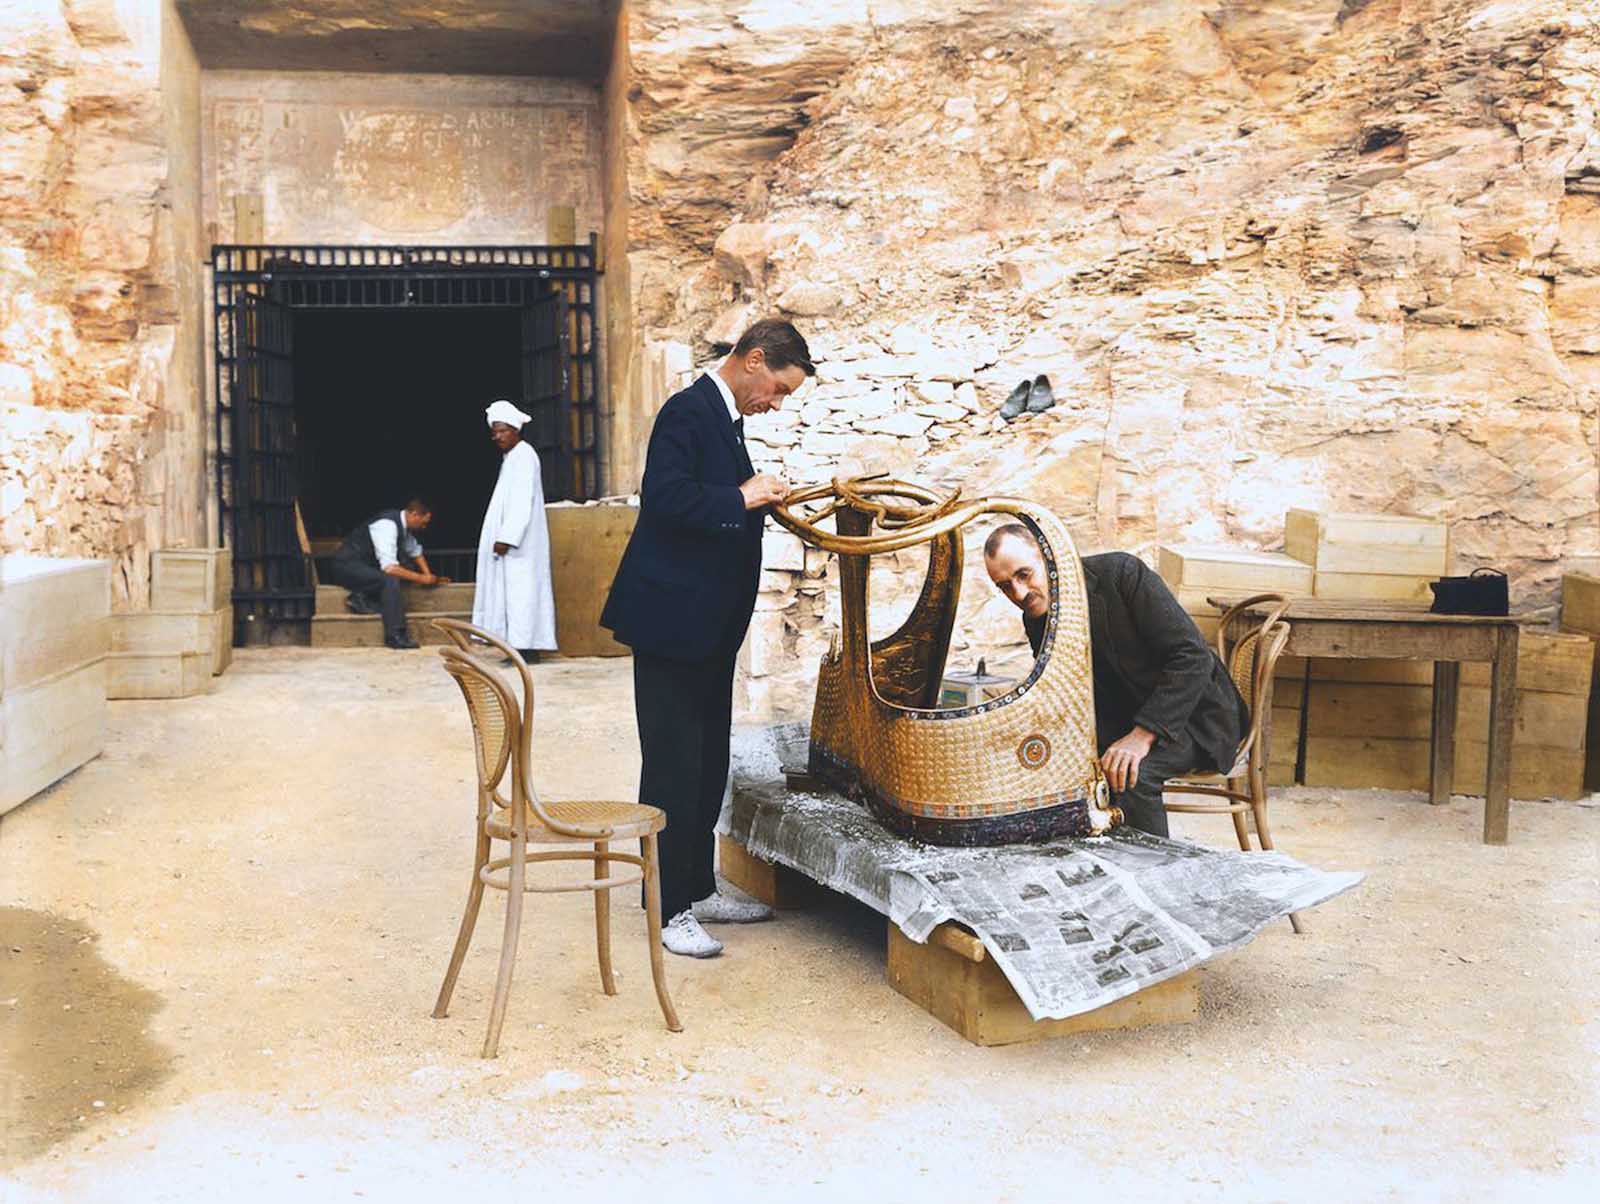 Arthur Mace and Alfred Lucas work on a golden chariot from Tutankhamun's tomb outside the